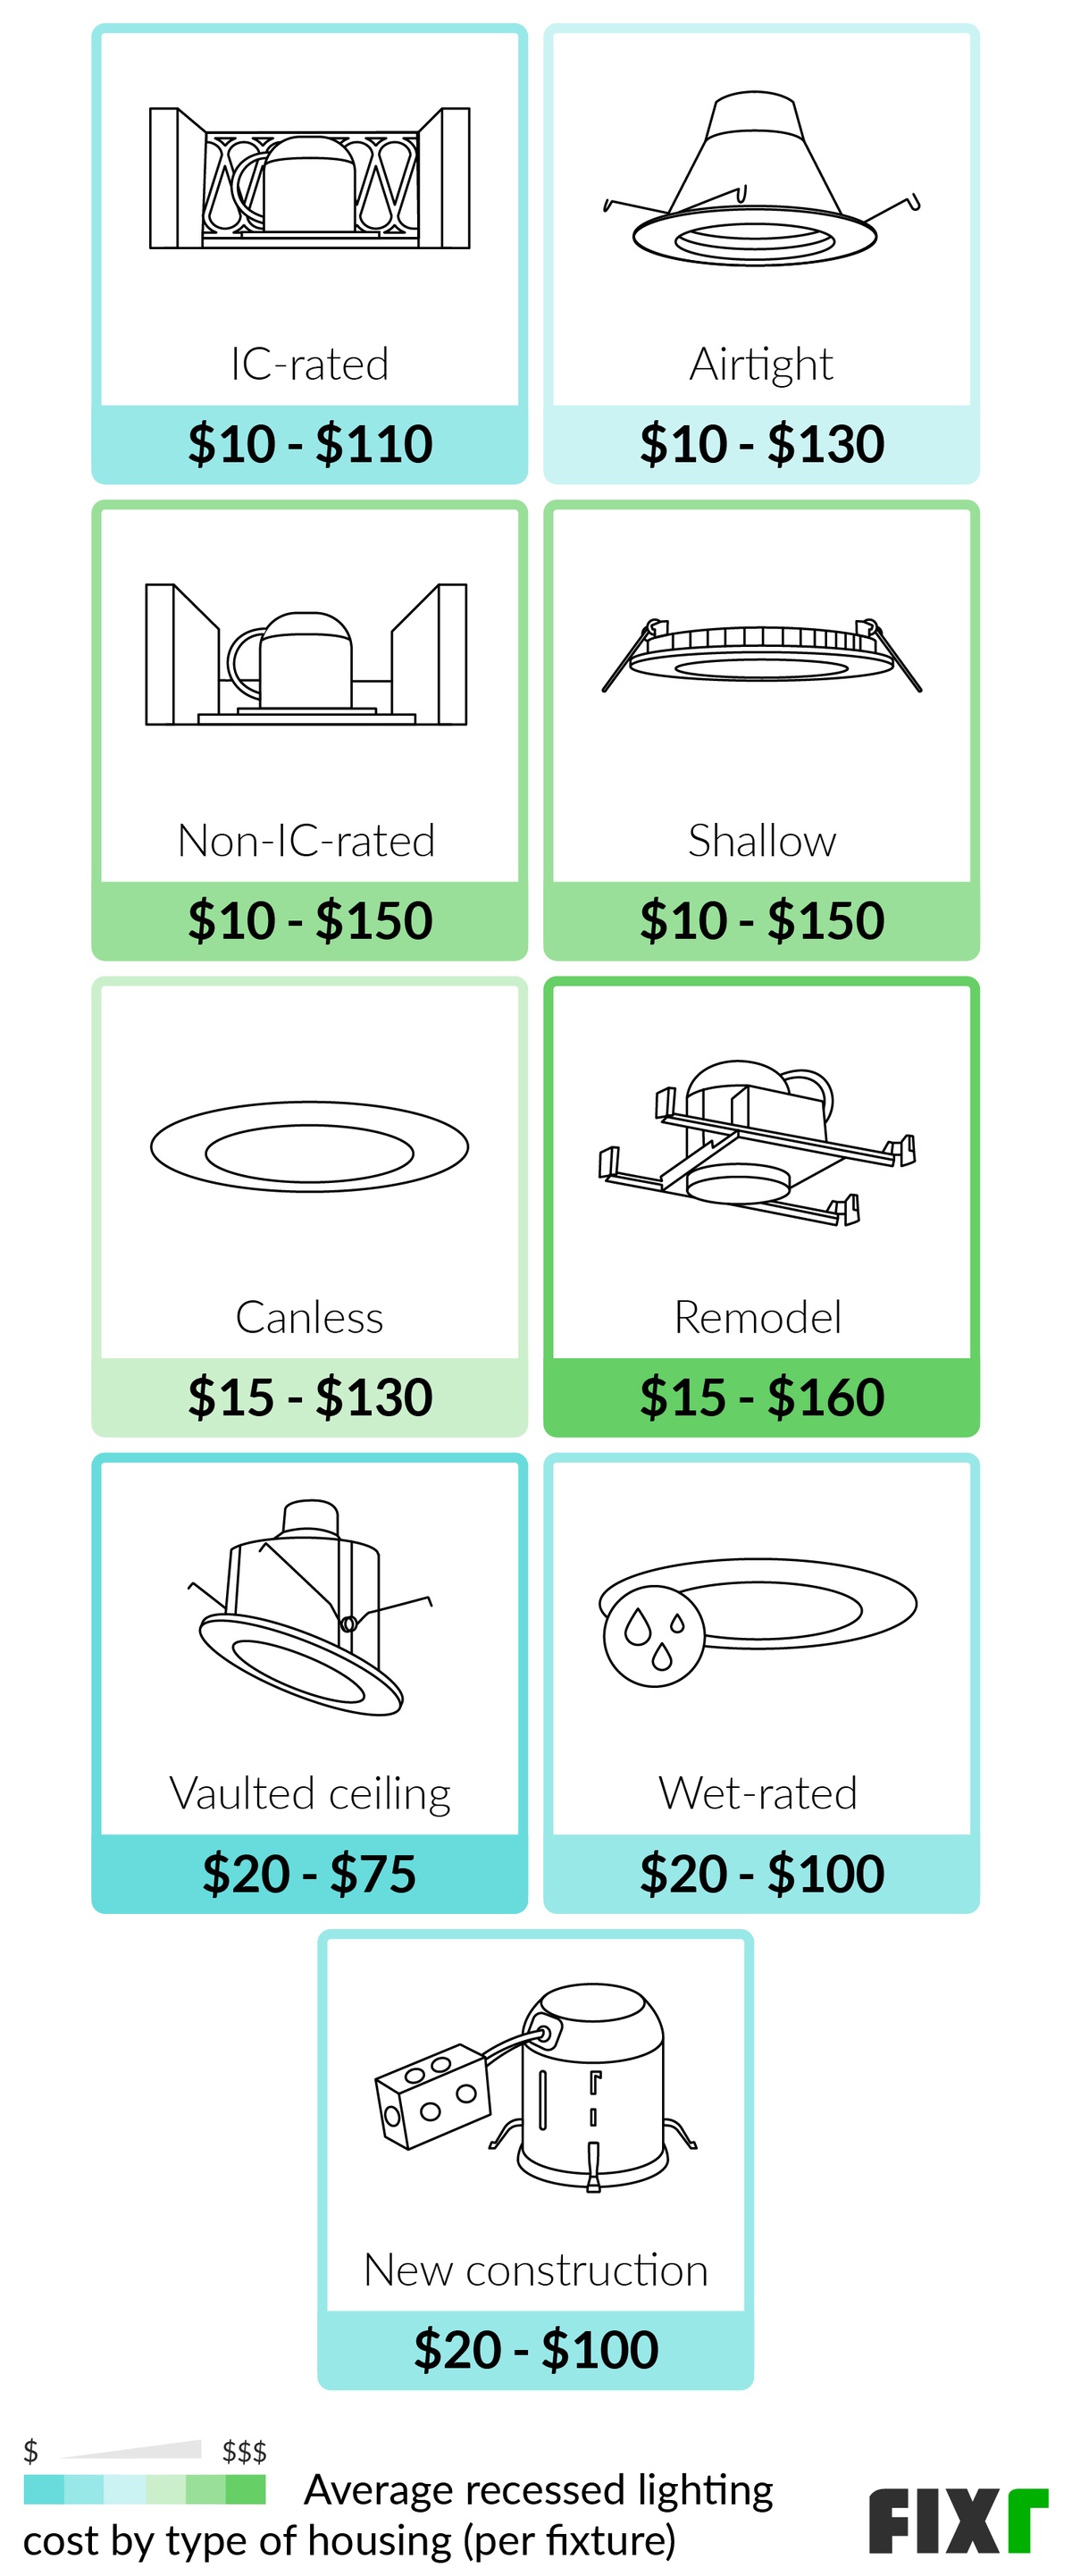 Recessed Lighting Installation Cost, How Much Does It Cost To Have 6 Can Lights Installed